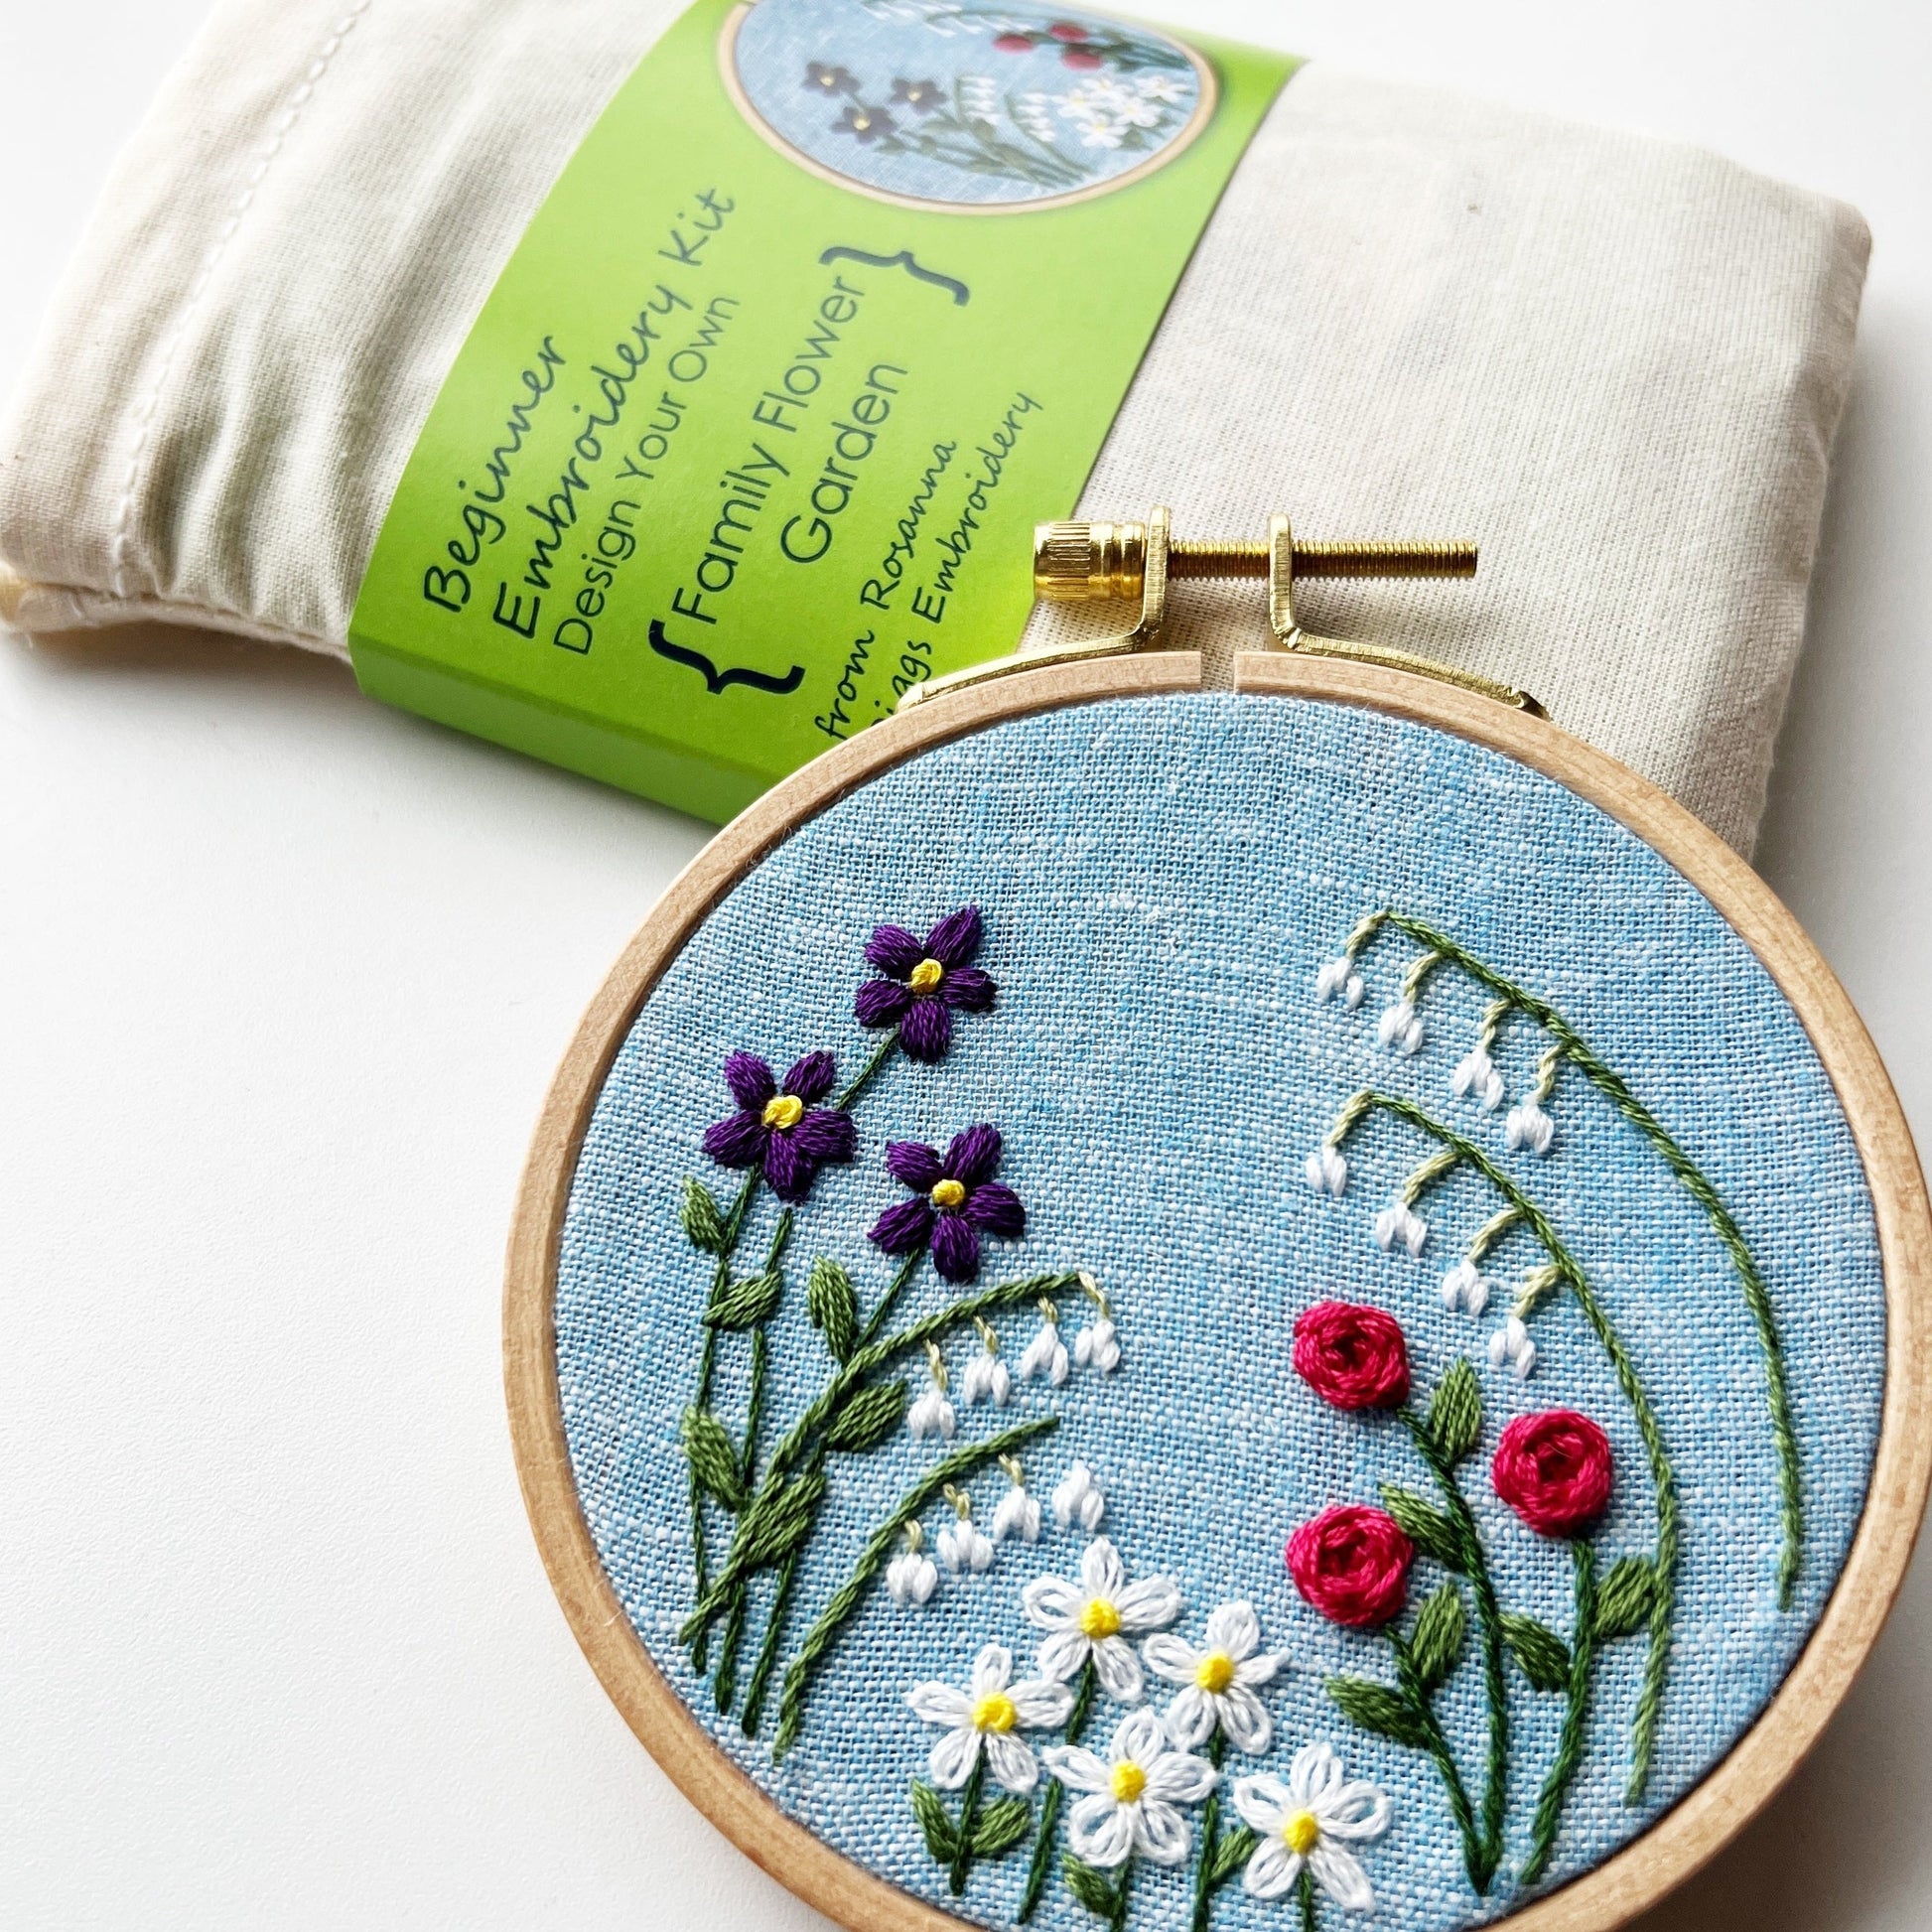 Wholesale Embroidery Starter Kits 